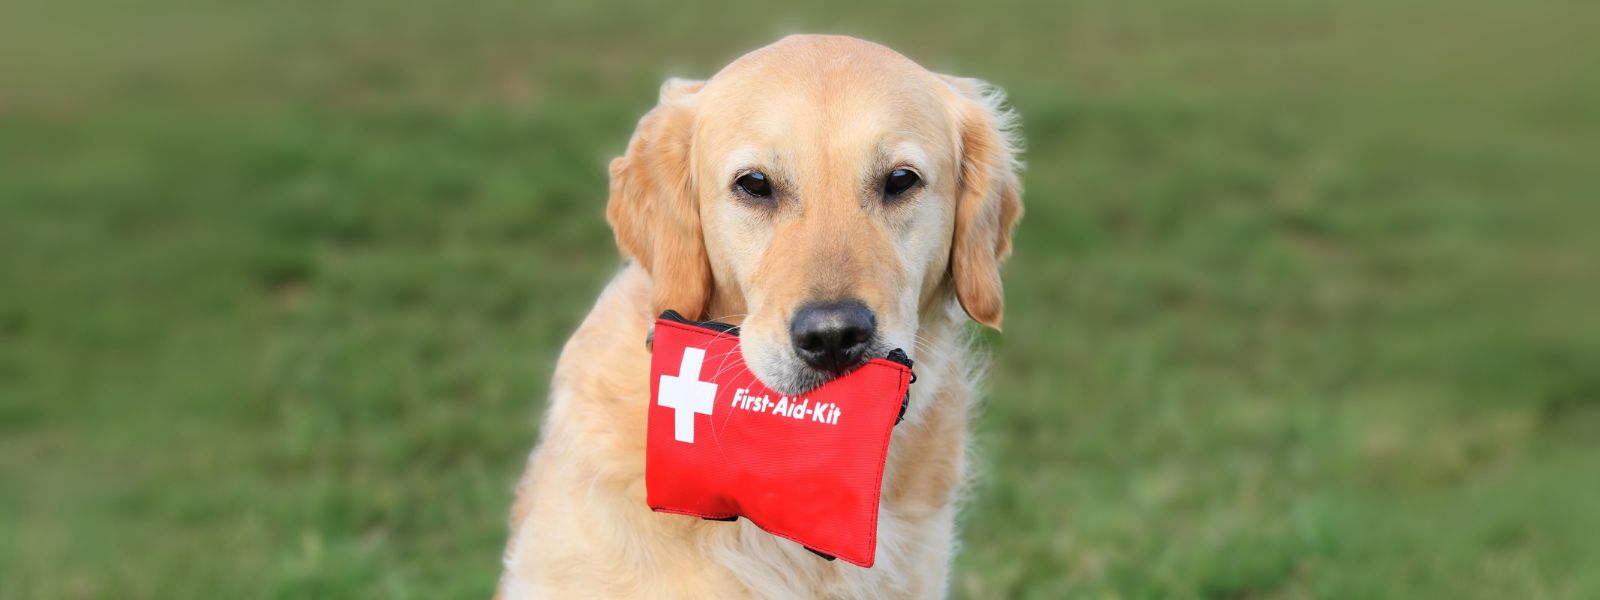 Veterinarian’s Guide First Aid Kits for Dogs